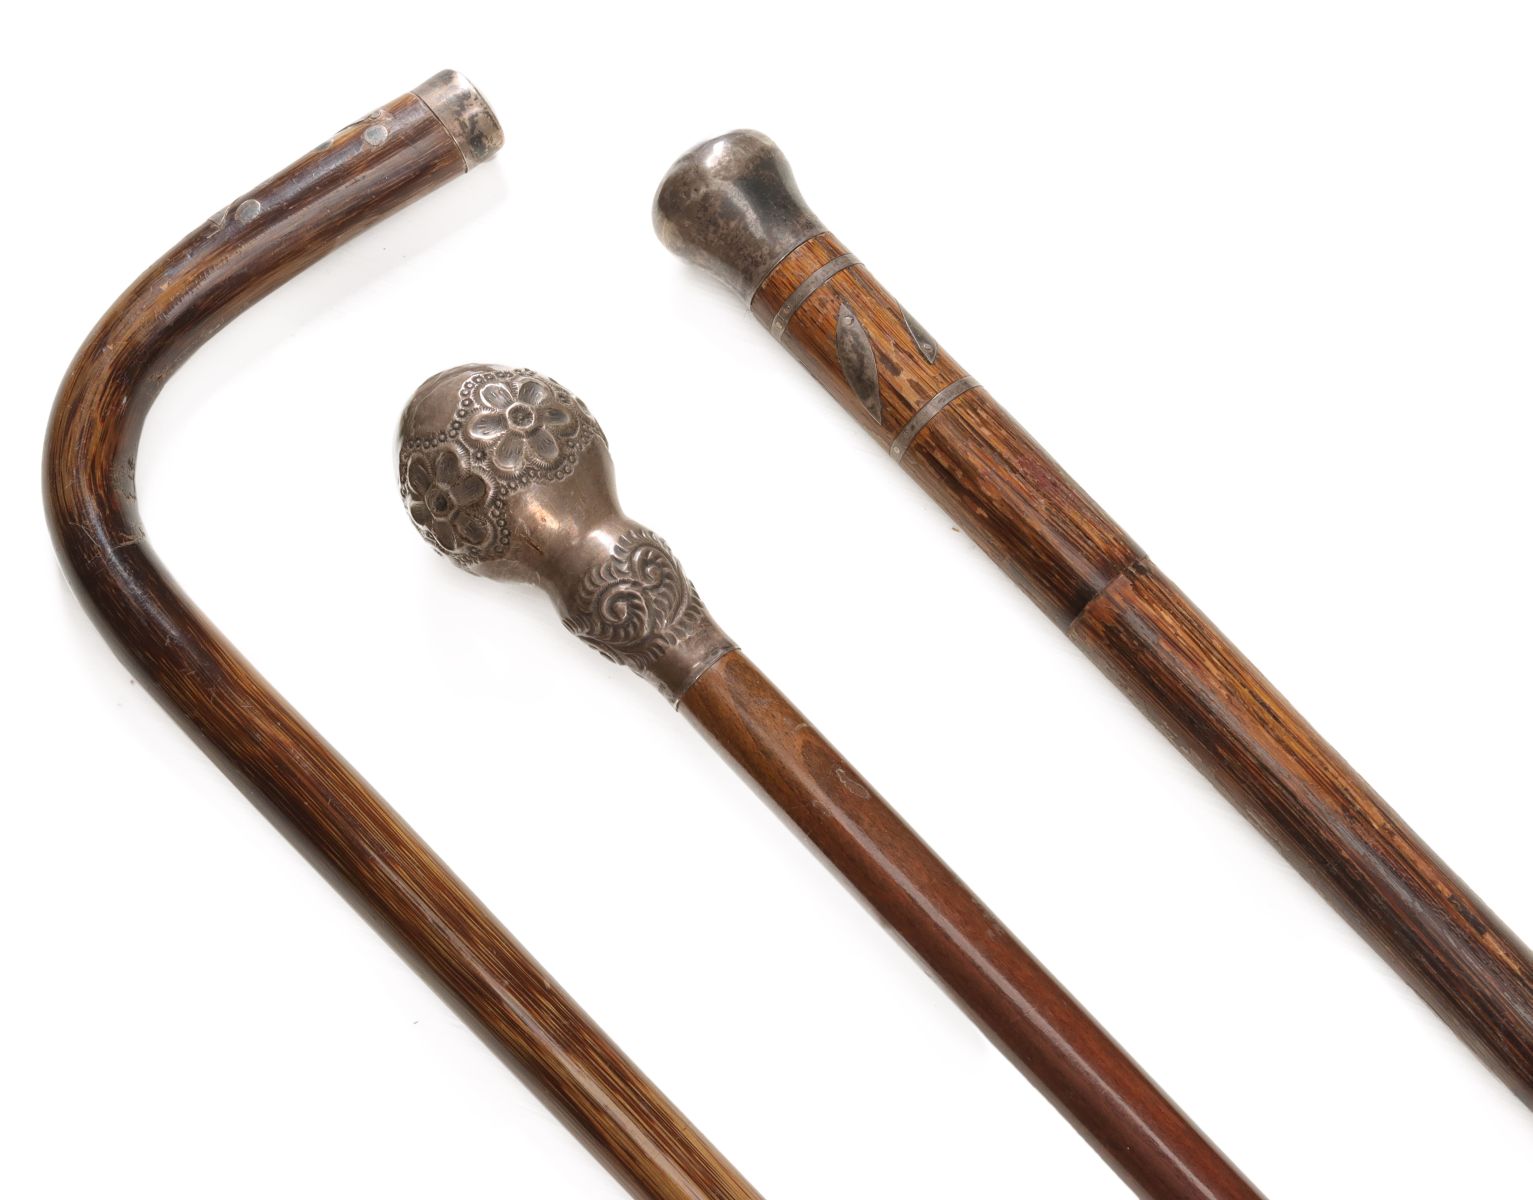 STERLING SILVER AND PARTRIDGE WOOD WALKING STICKS